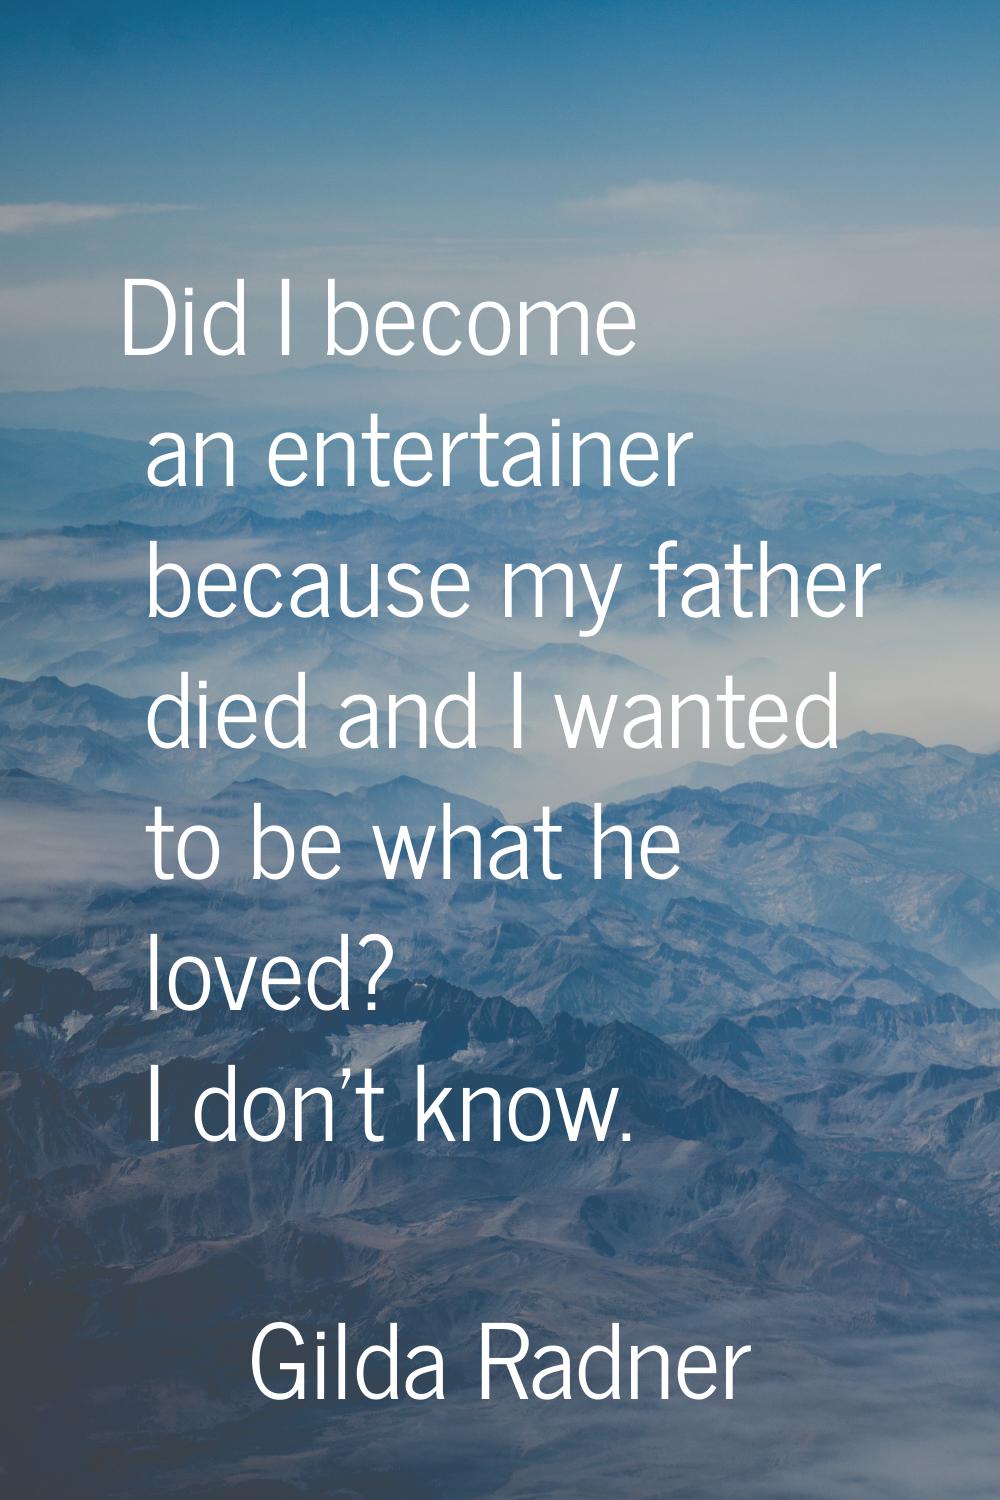 Did I become an entertainer because my father died and I wanted to be what he loved? I don't know.